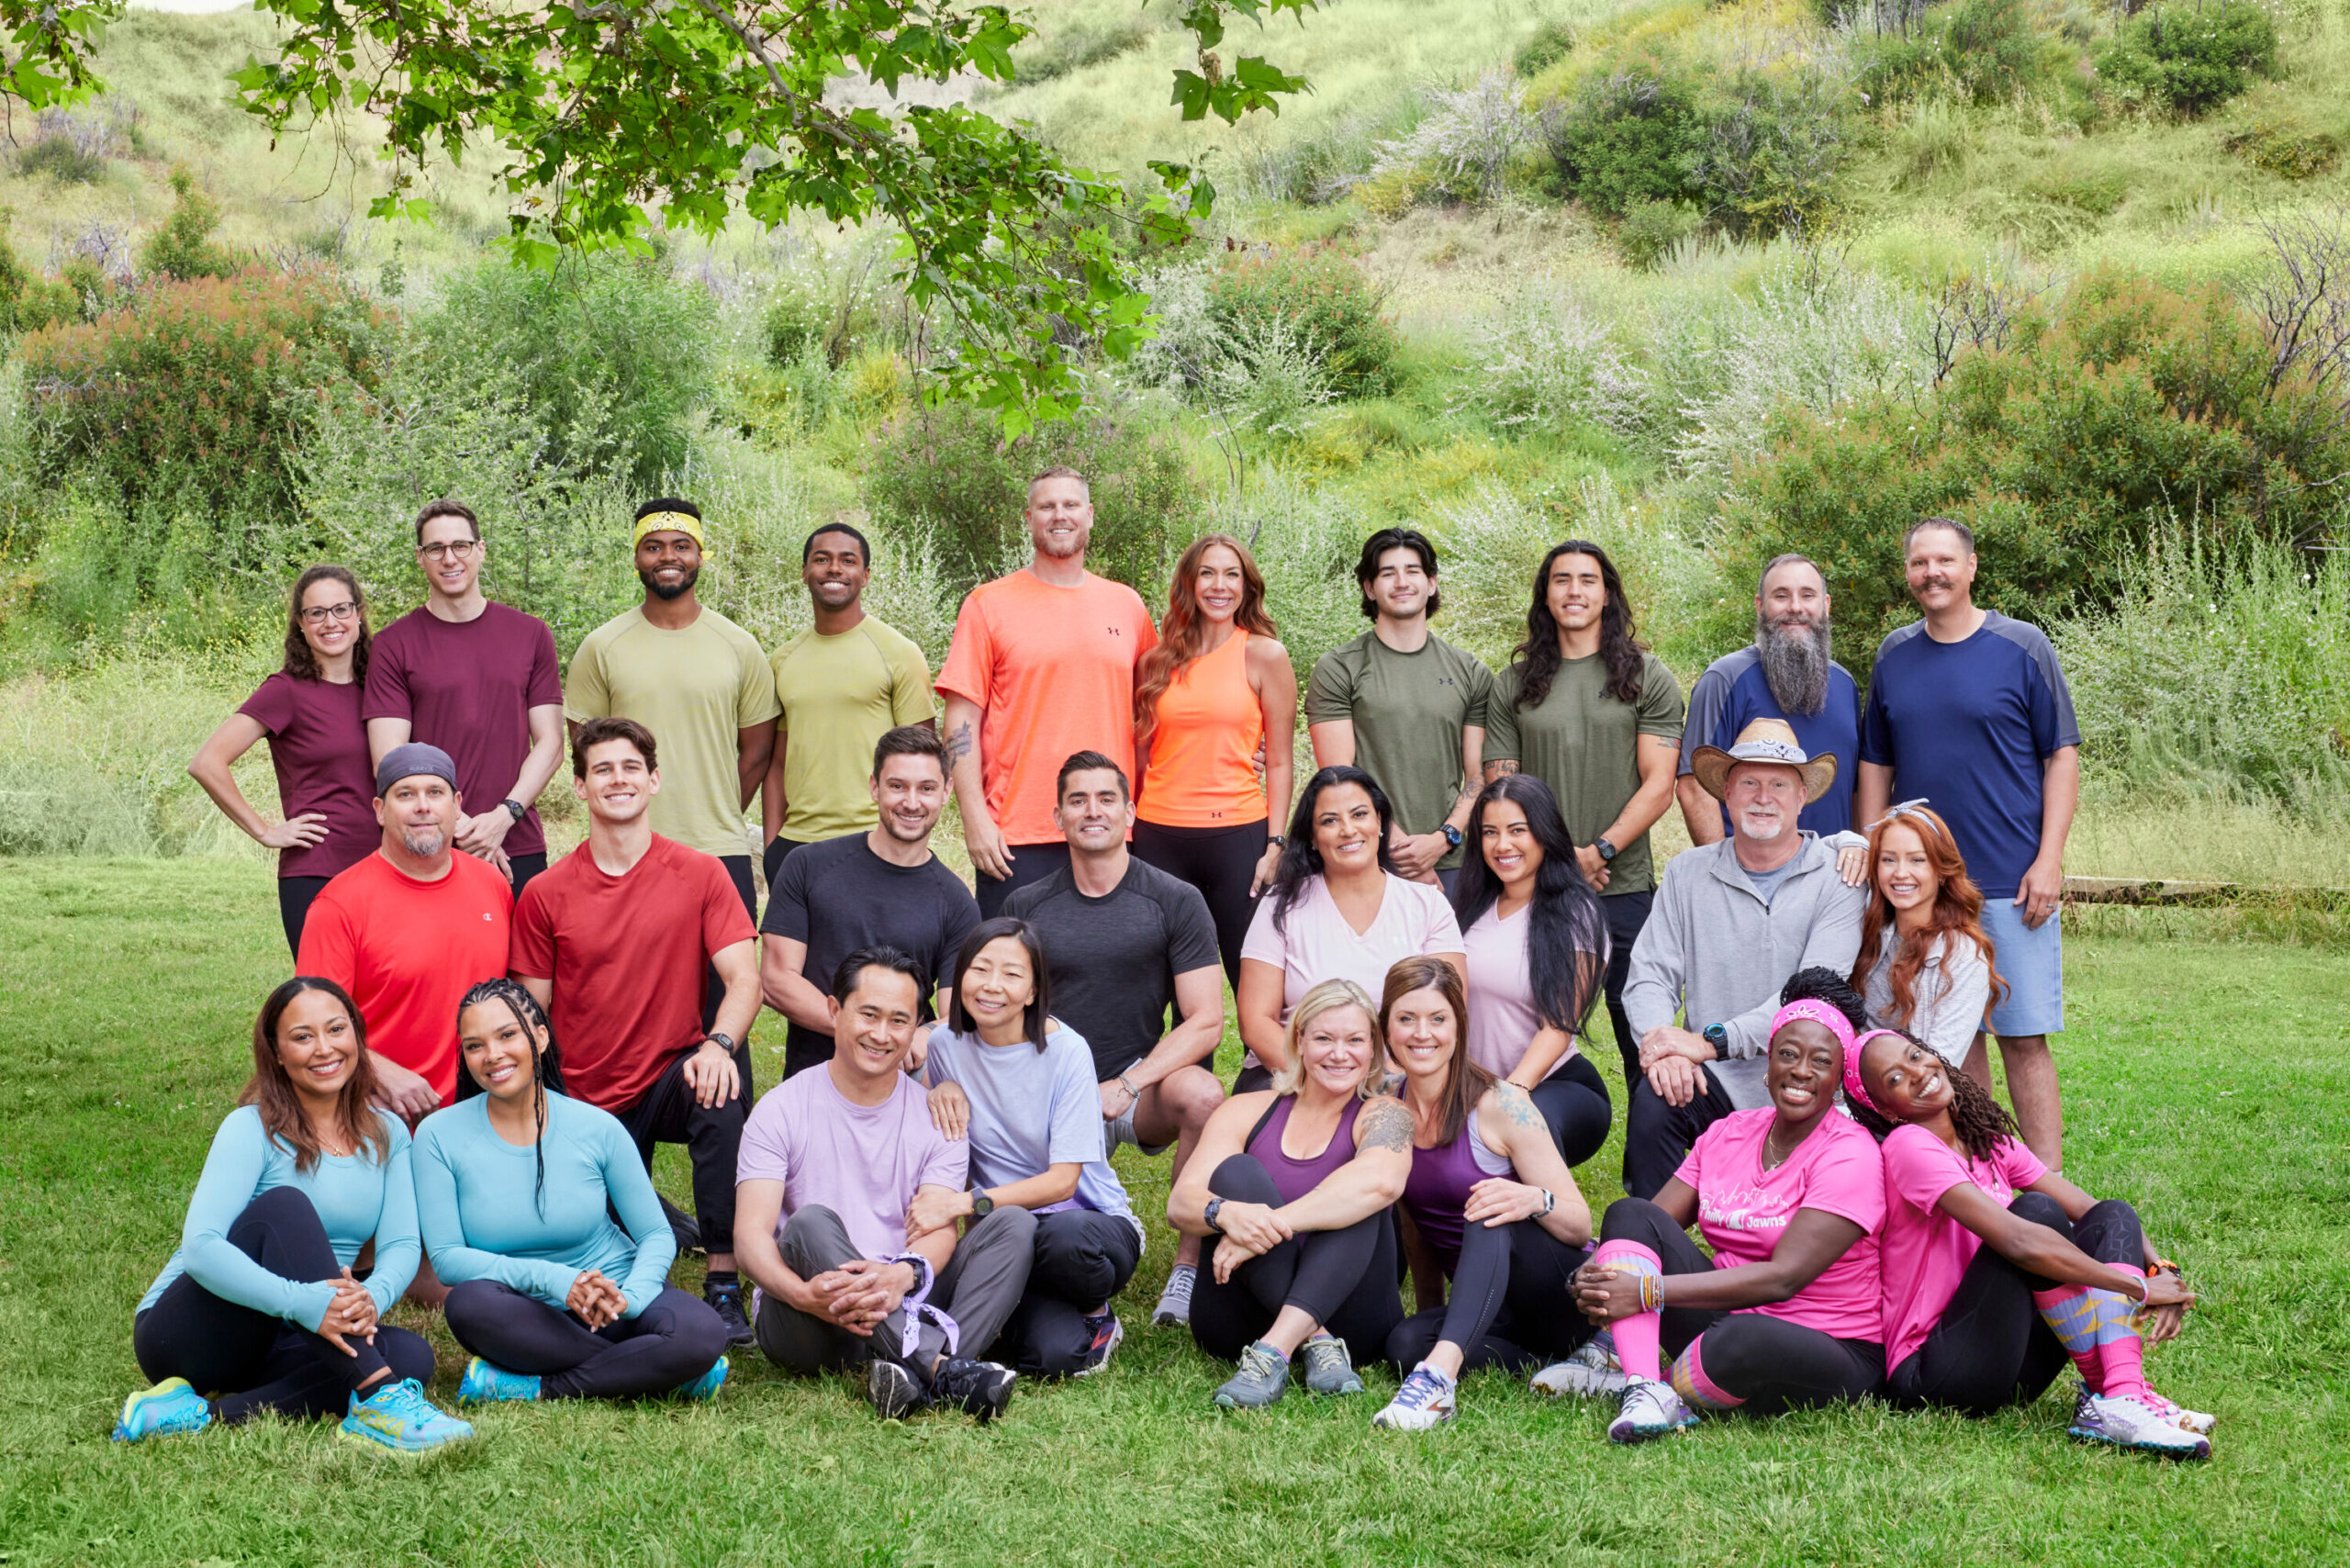 "The Amazing Race" Season 35 premieres on Wednesday, Sept. 27 (9:30-11:00 PM, ET/PT) on CBS and streaming on Paramount+. (Photo Credit: Sonja Flemming/CBS)